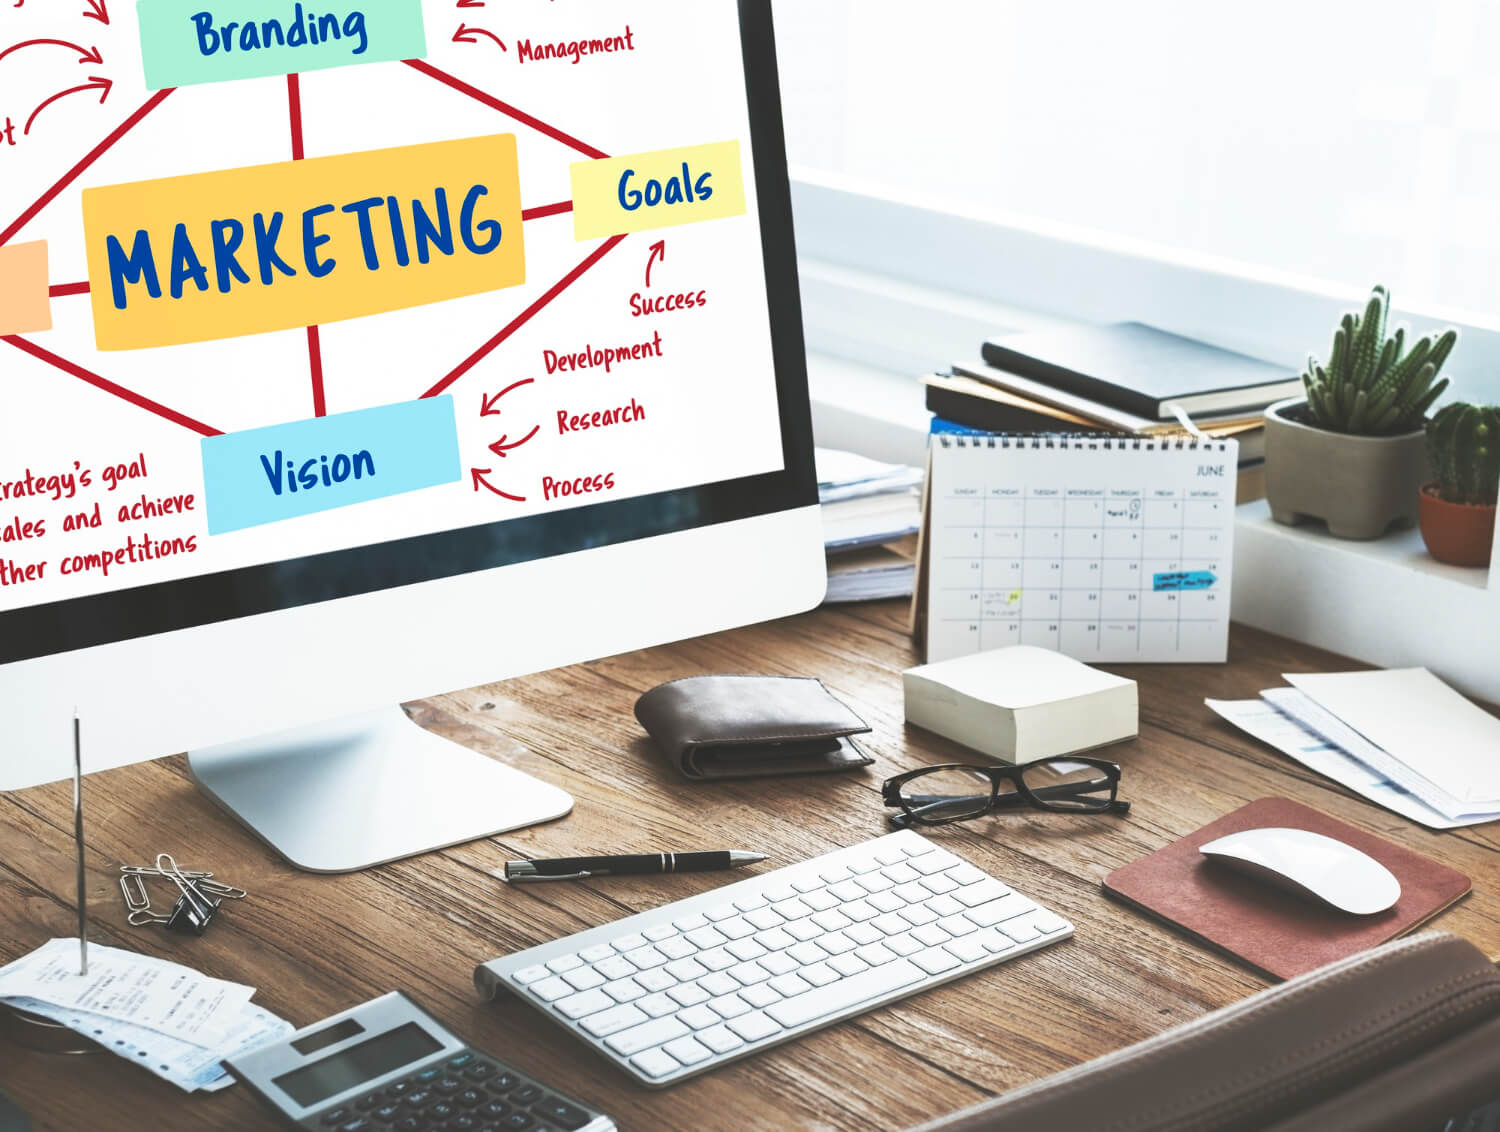 Creating a marketing planning on the screen